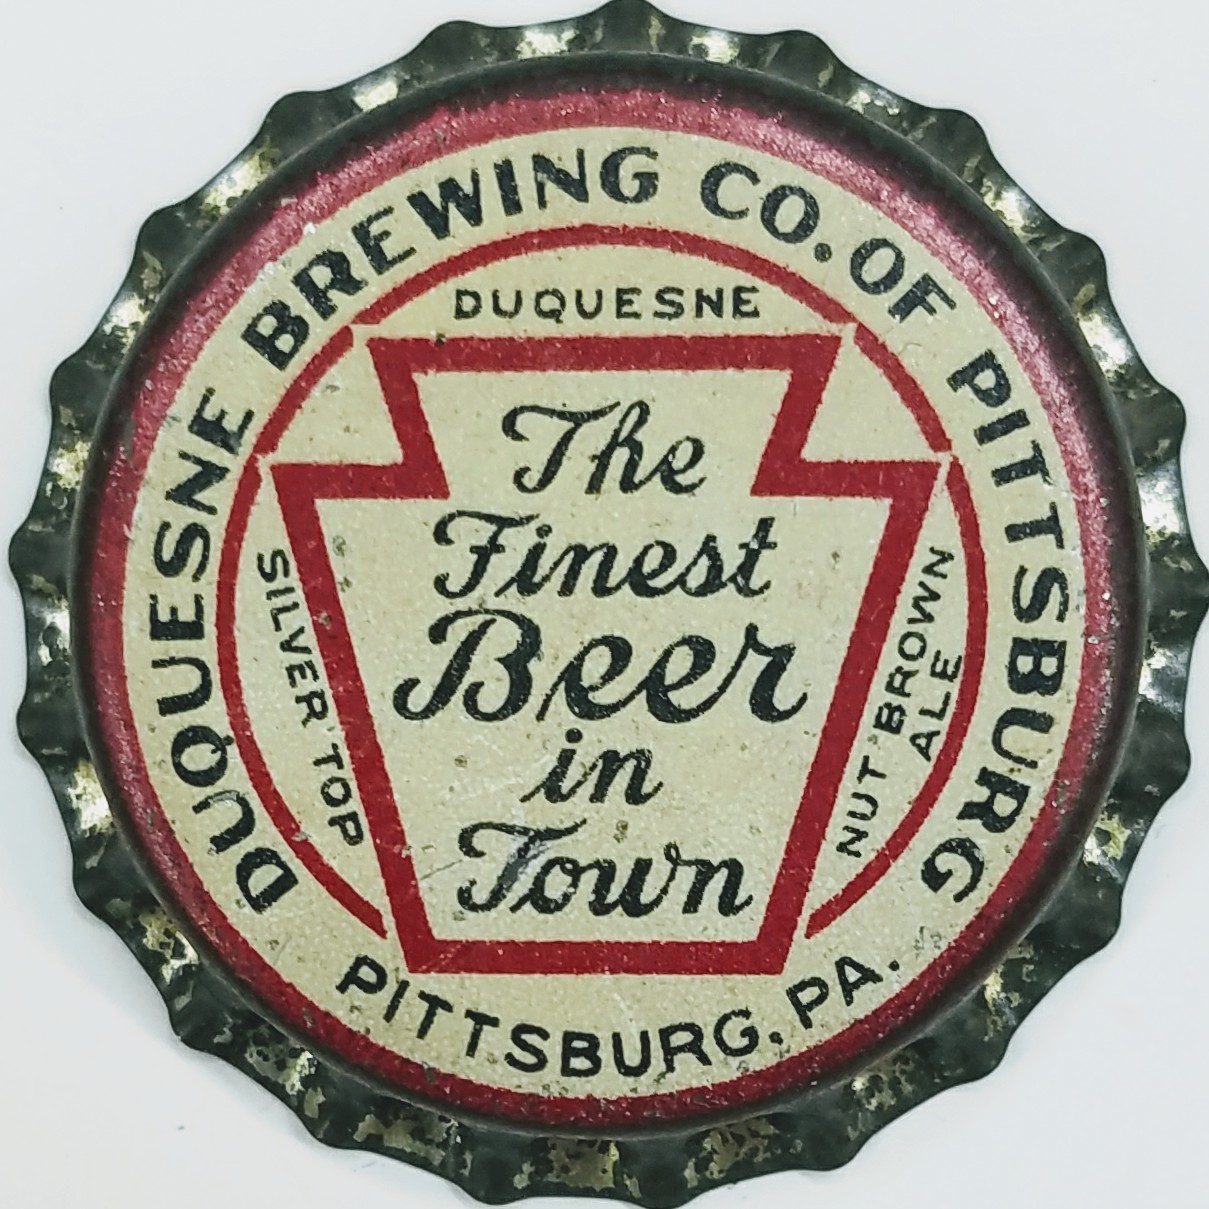 Duquesne Brewing Co 2A the Finest Beer in Town PA Tax.jpg